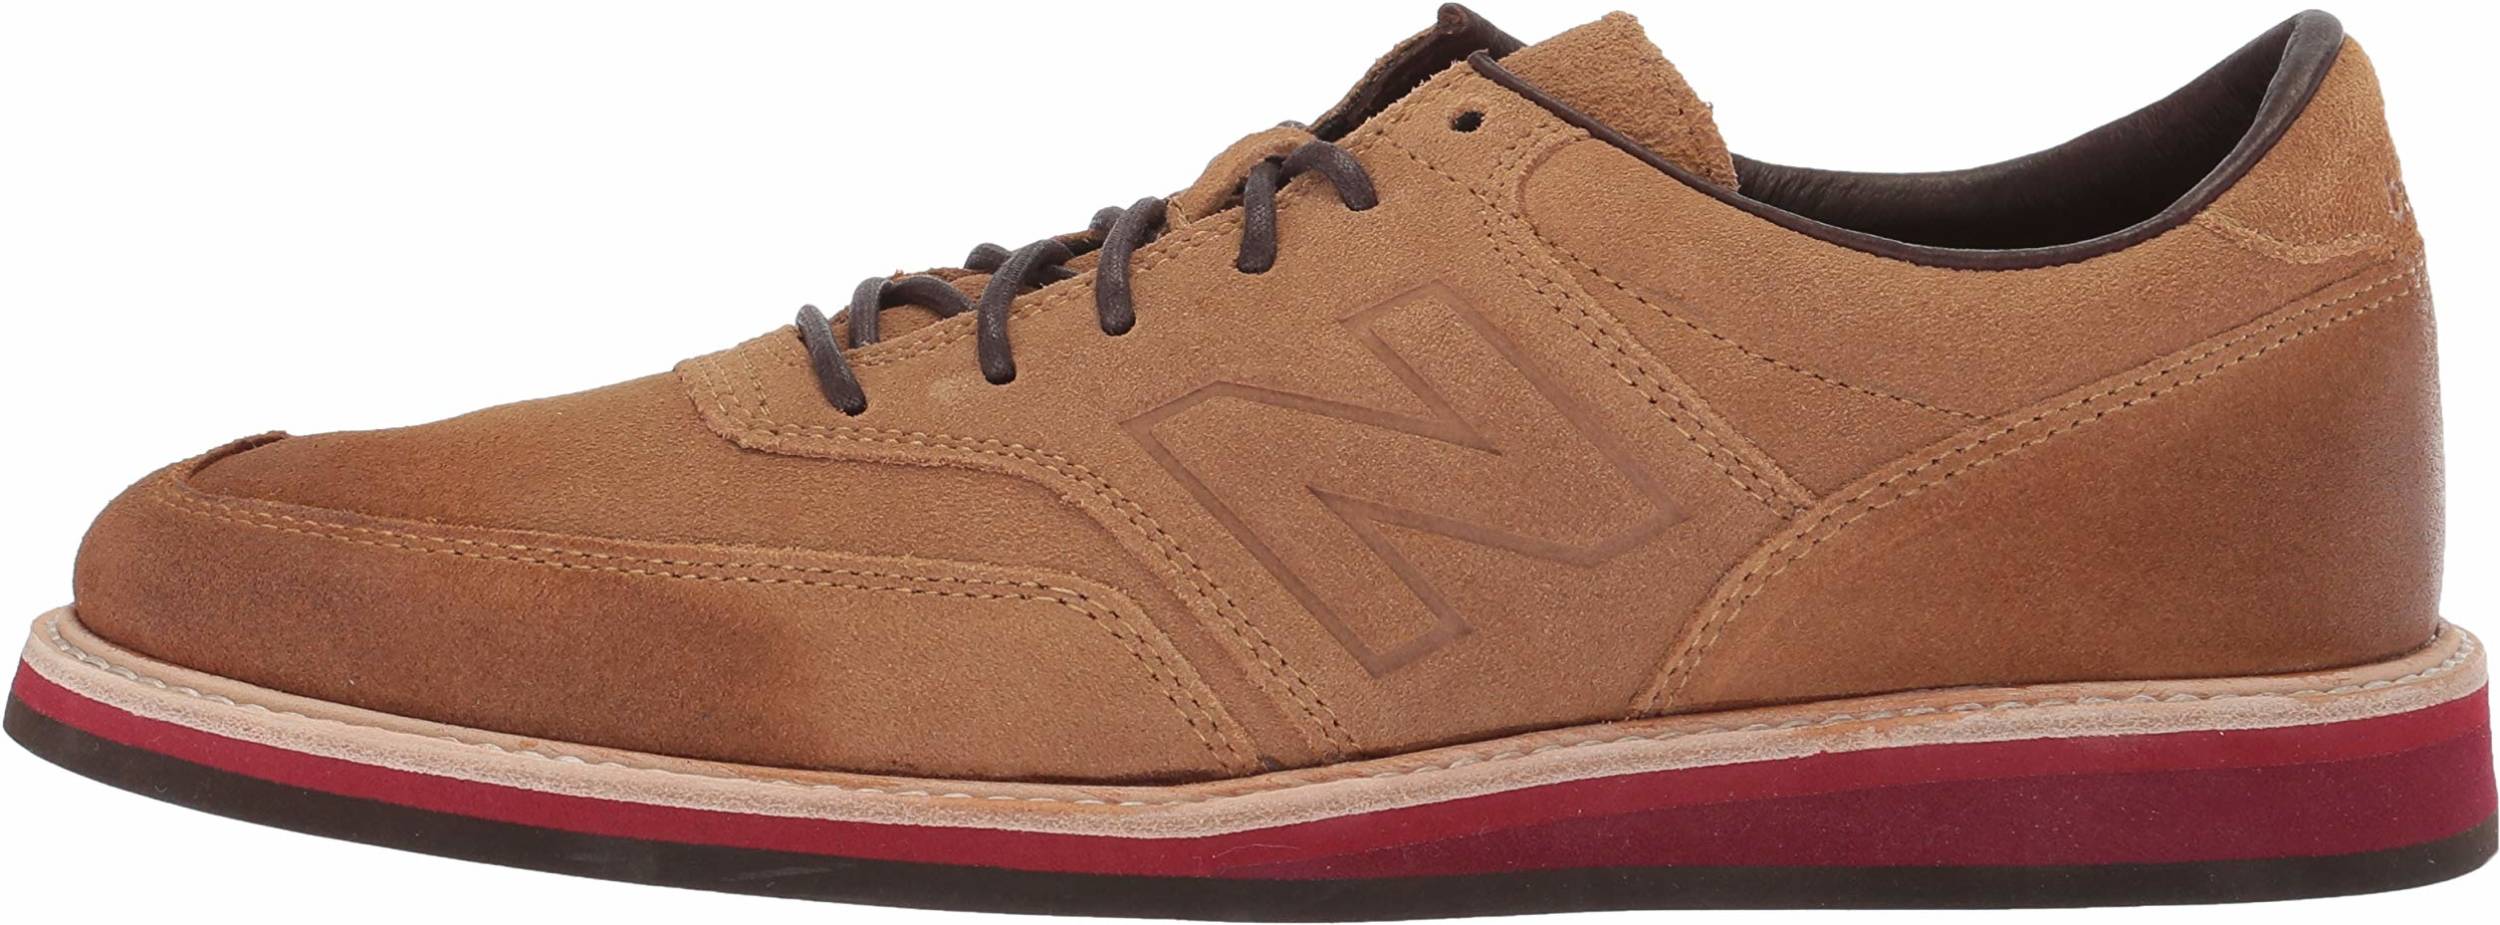 new balance leather mens shoes